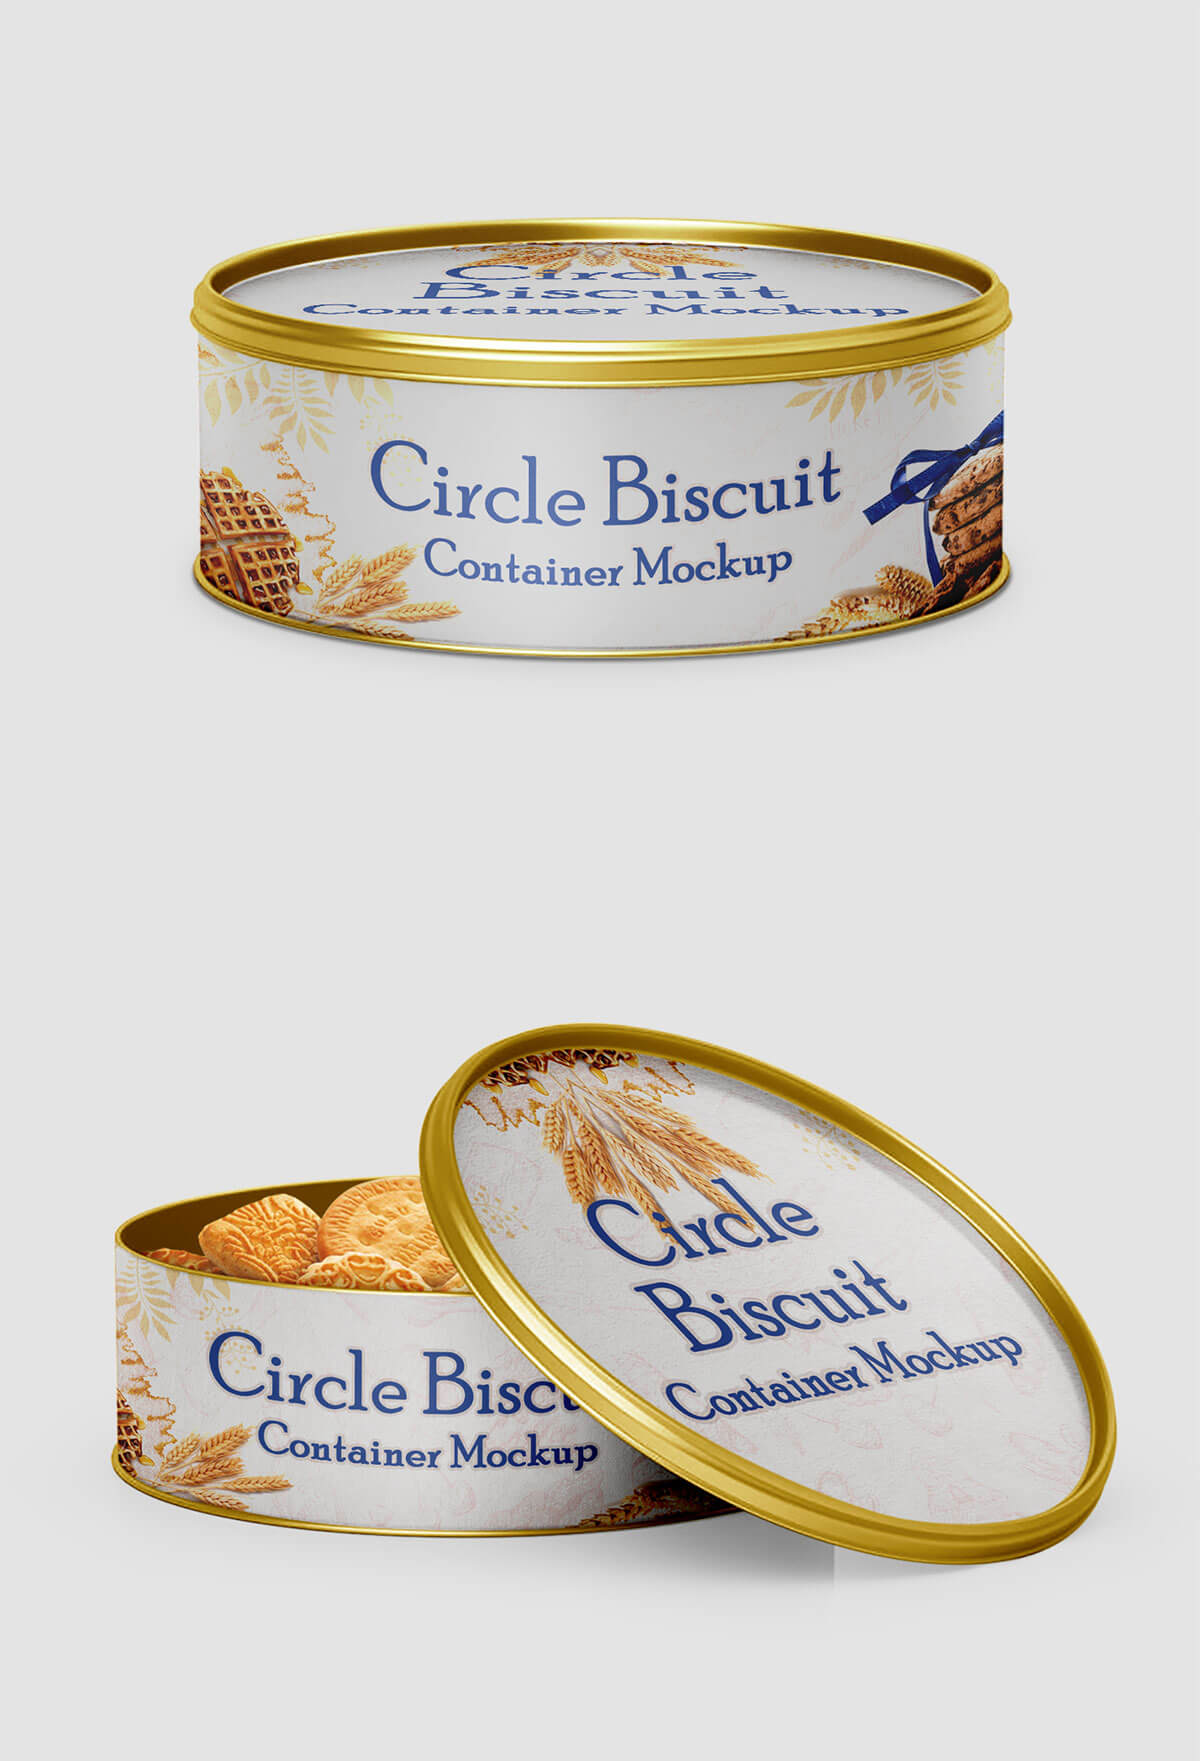 Circle Biscuit and Cookies Tin Container Mockup Free Download